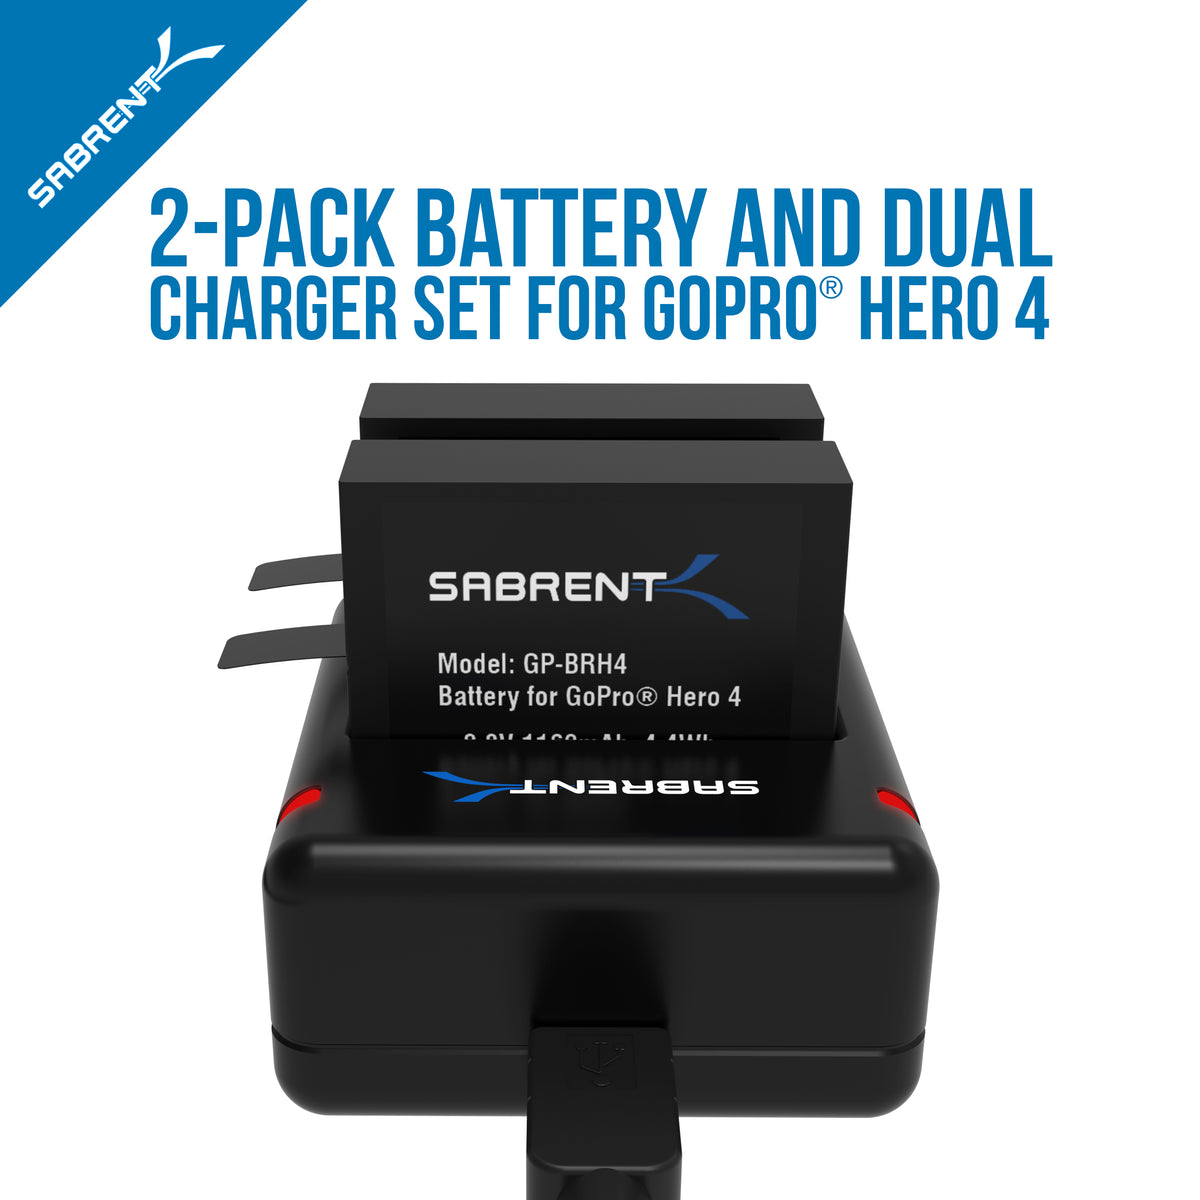 2 Pack Battery Set with Dual Battery Charger for GoPro HERO4 [AHDBT-401, AHBBP-401]